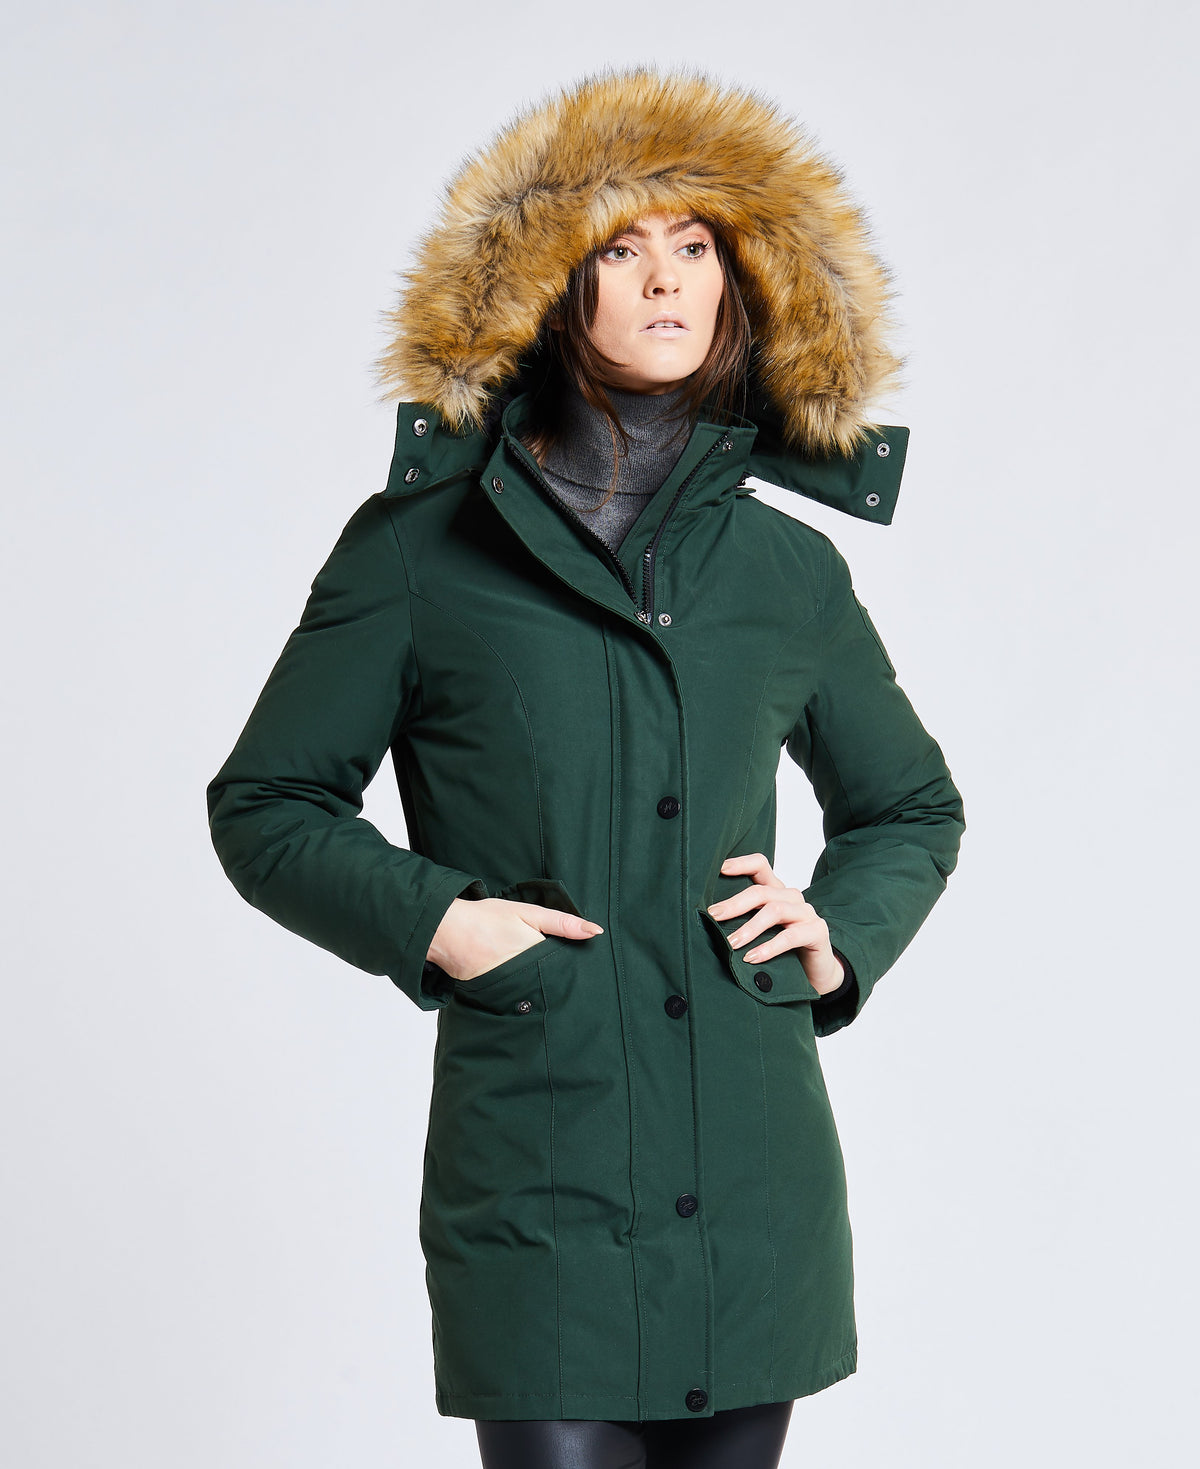 Expedition (Women) 1.0 - North Aware